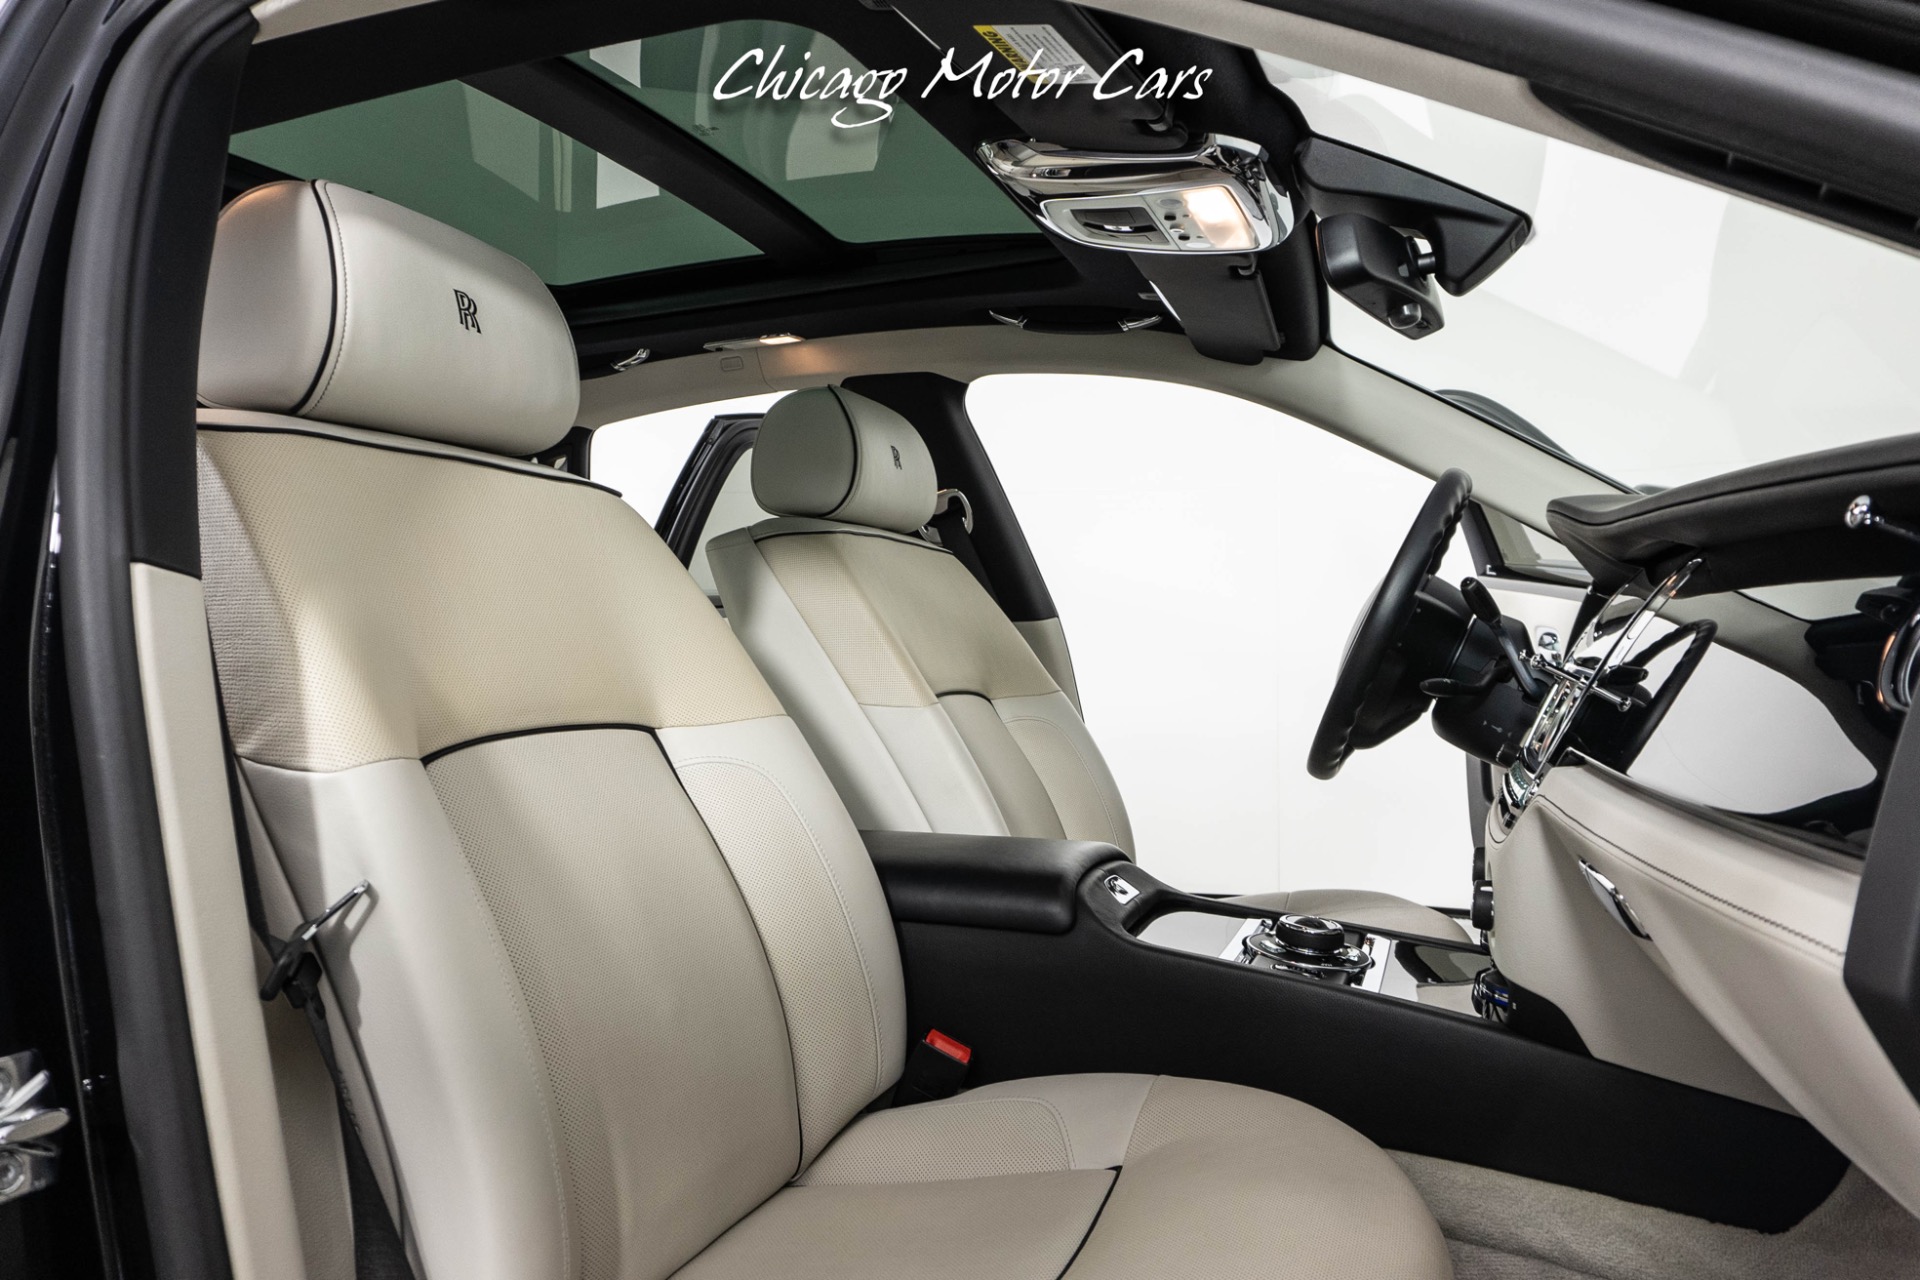 Used-2014-Rolls-Royce-Ghost-Only-10K-Miles-Stunning-Seashell-Interior-Scheme-V-Spec-Package-Loaded